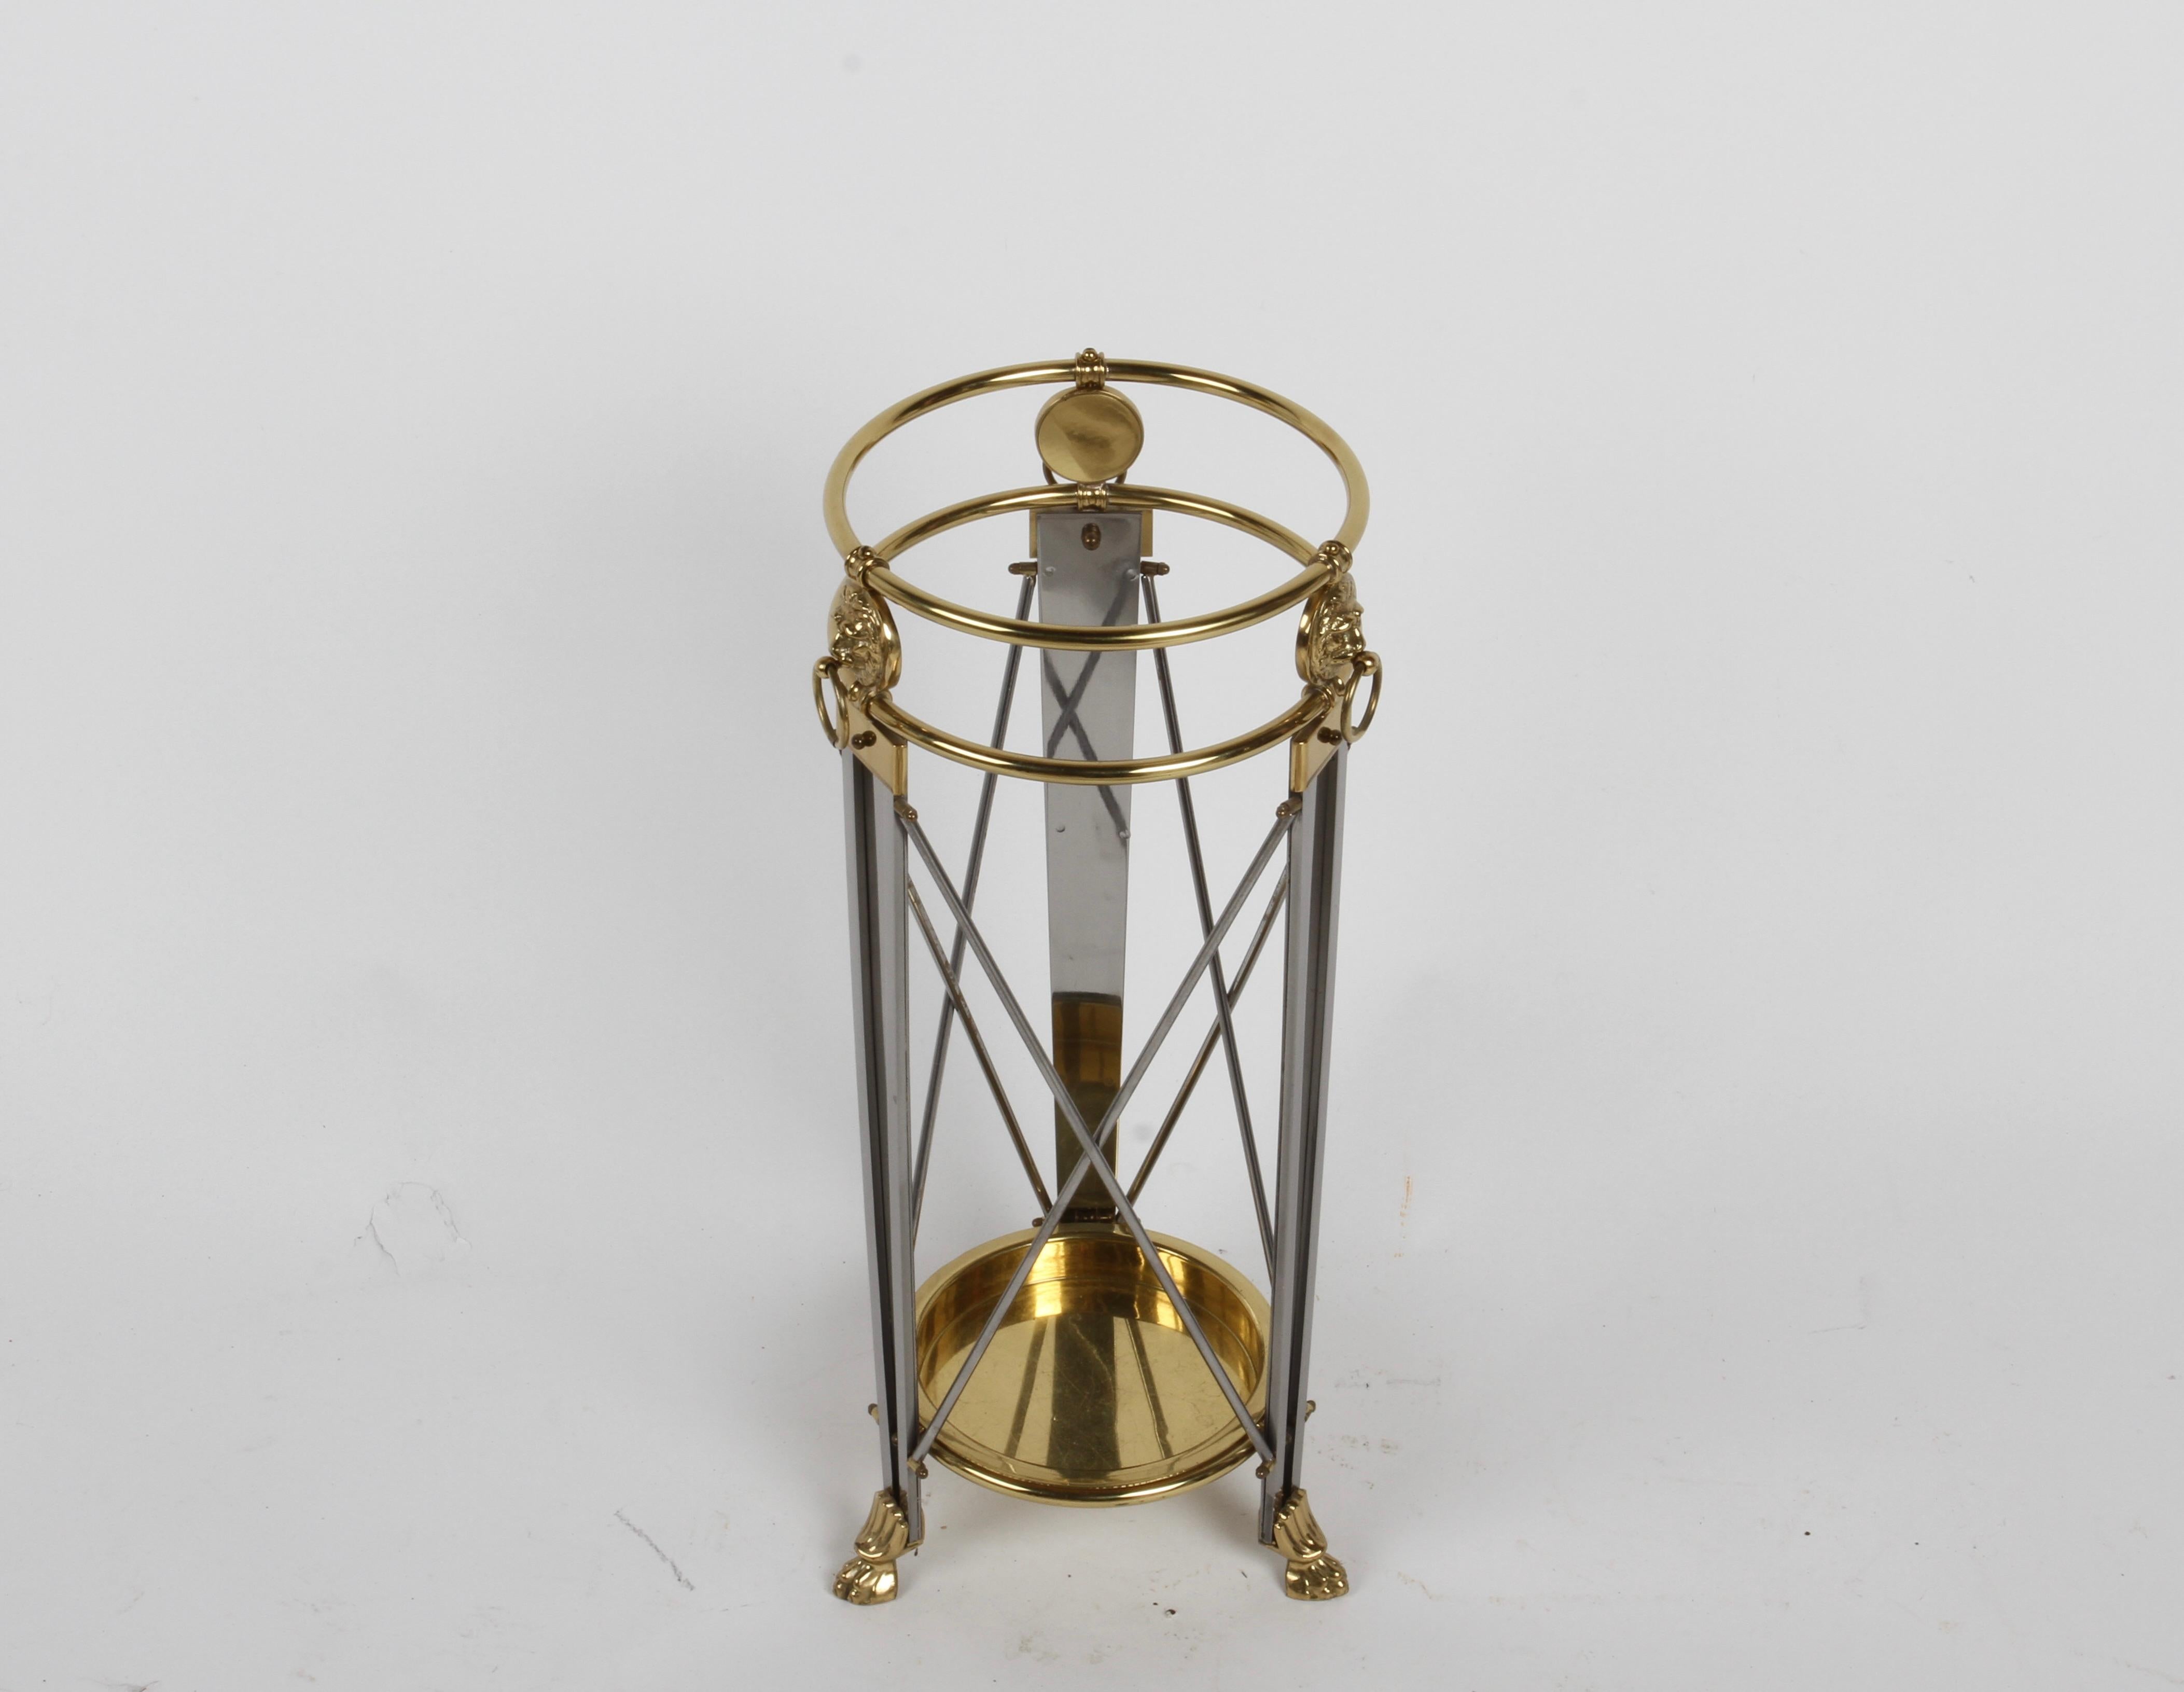 Hollywood Regency or Empire style classic form umbrella stand in stainless steel & brass with brass lions heads with ring, on stainless legs with brass paw feet and stainless X stretchers. Brass tray at the bottom, has minor scuffs and a few dings. 